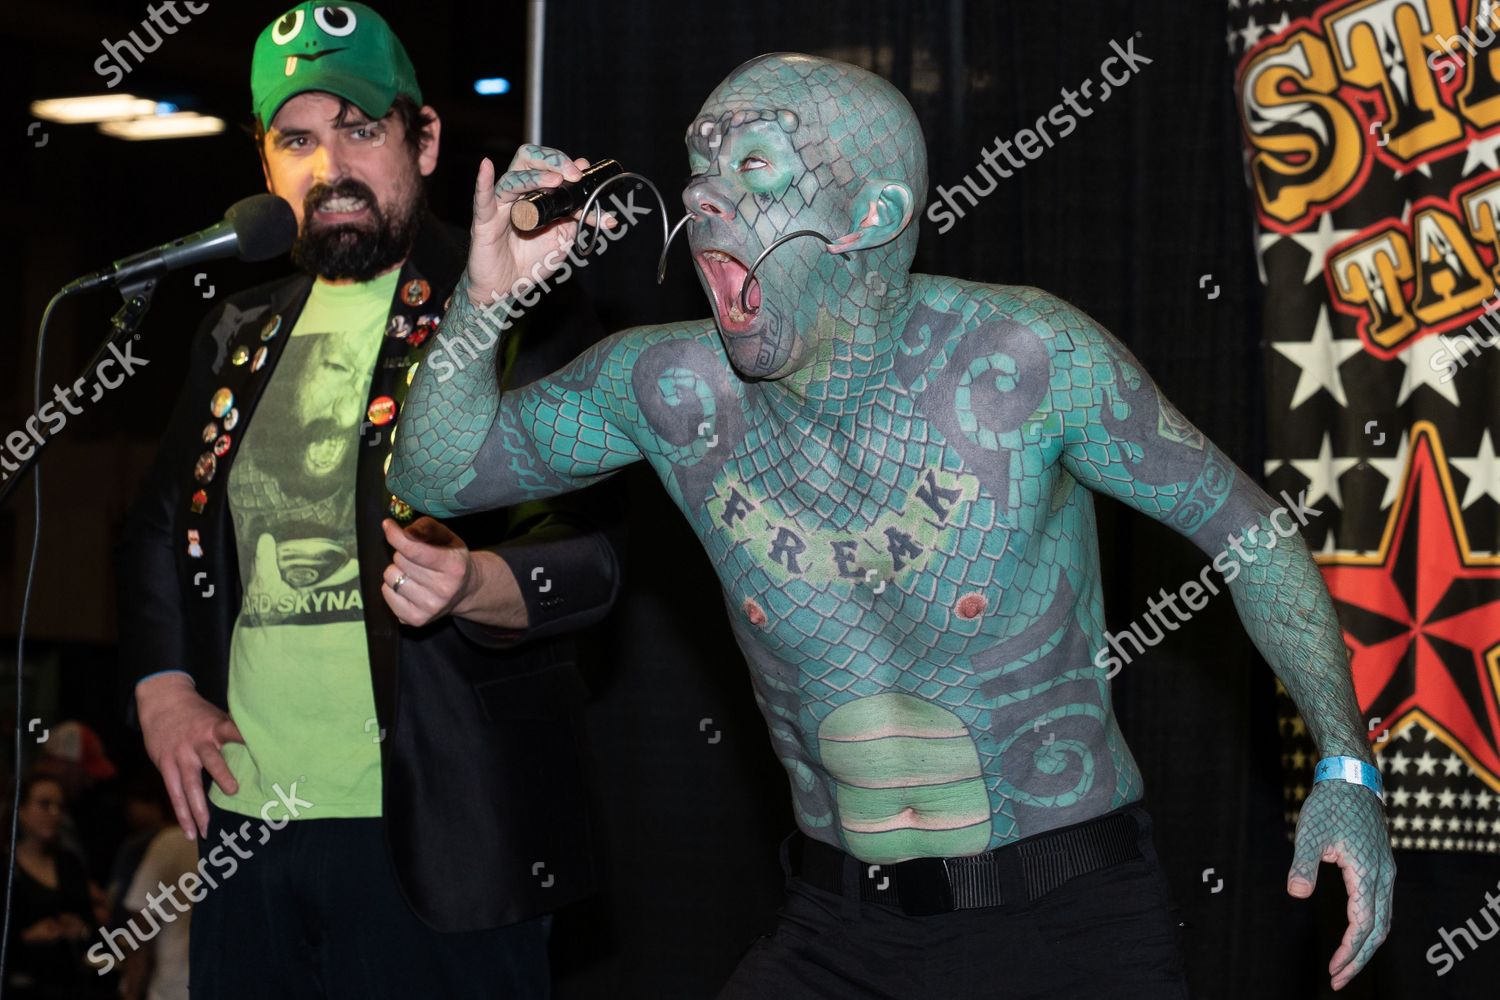 10. Eric Sprague, also known as "The Lizardman", has a full-body tattoo of green scales and has had his teeth filed into sharp points. - wide 3